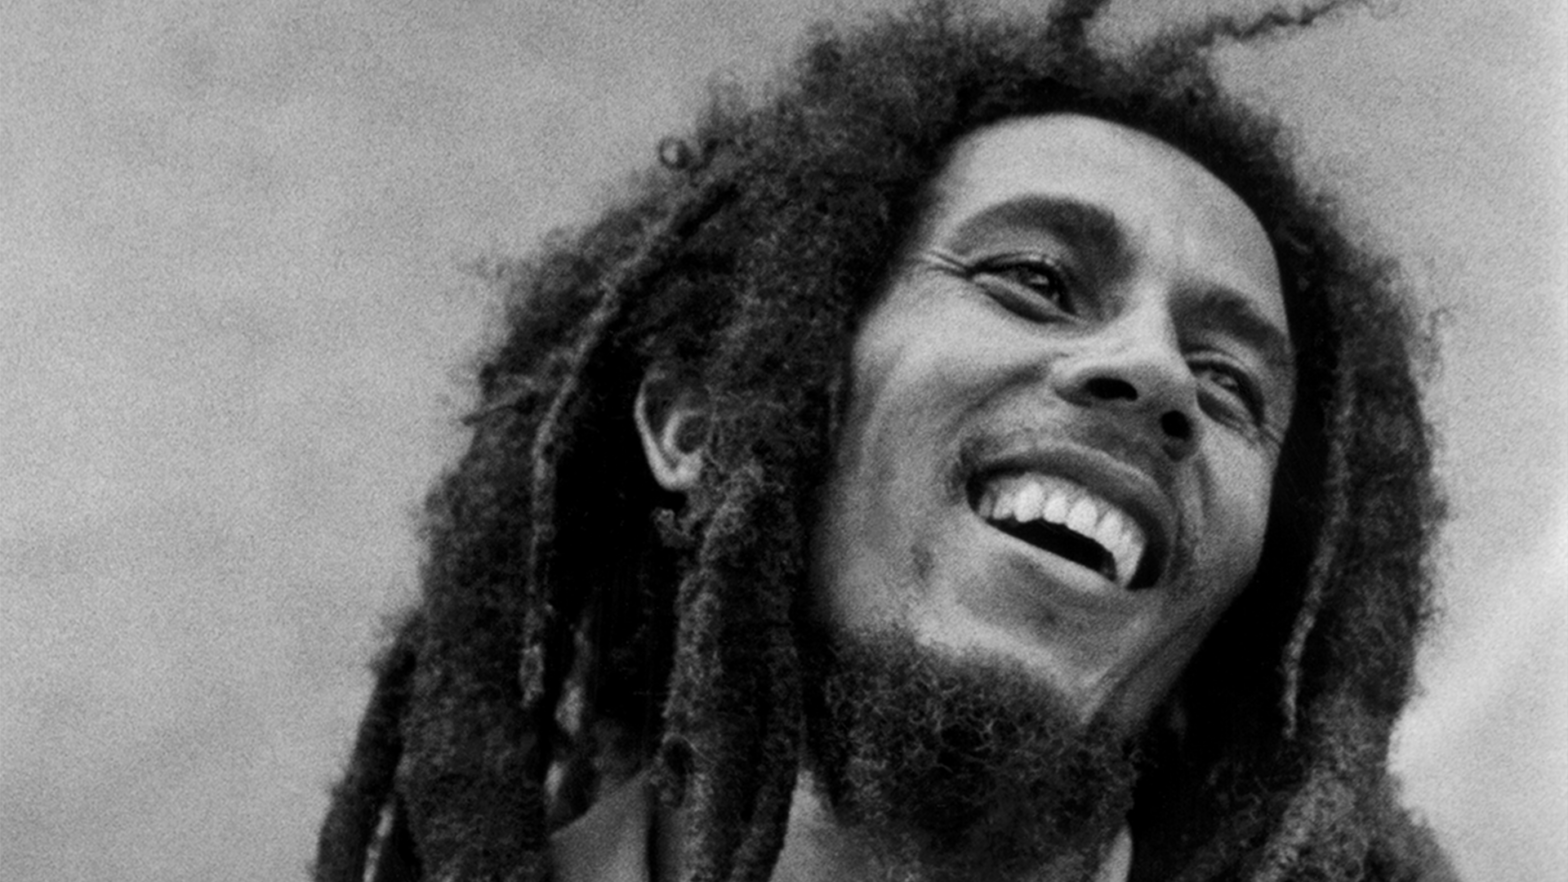 Bob Marley Family And Premiere Cannabis Brand Jeeter Release ‘One-Of-A-Kind Cannabis Line’